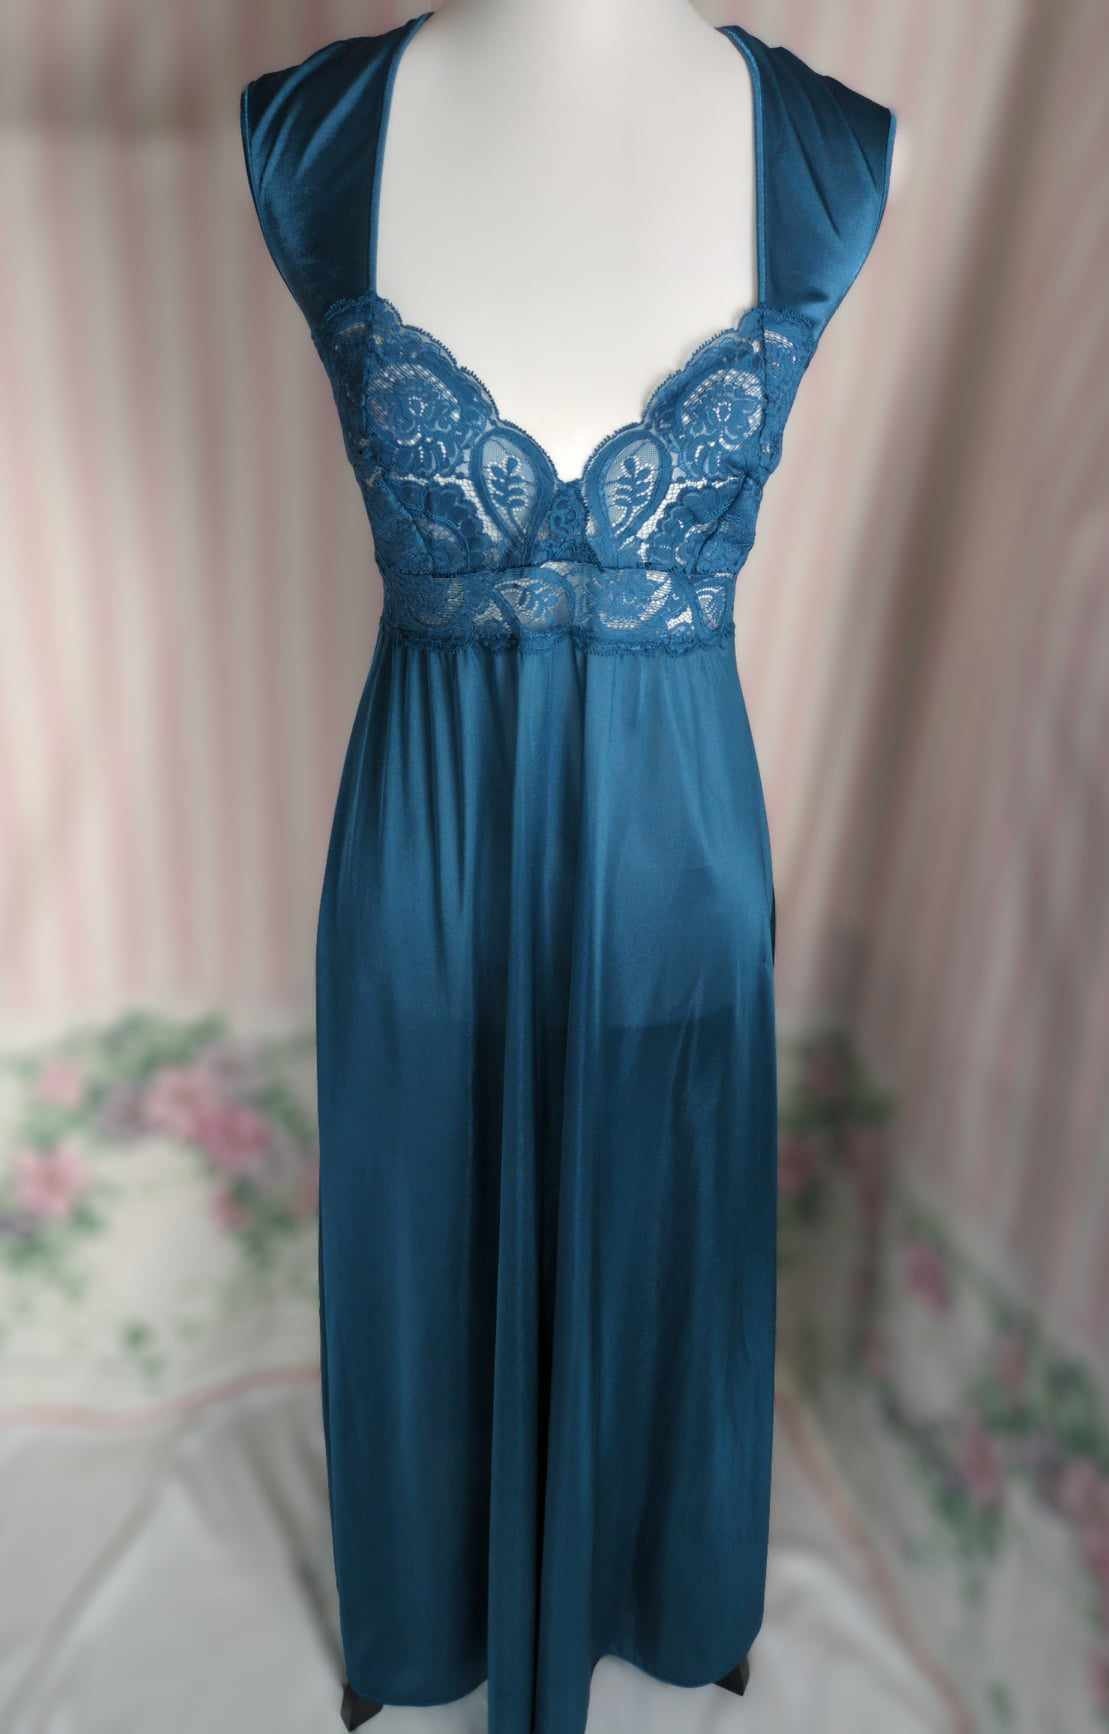 M Vintage Olga Nightgown Victorian Style With Cap Sleeves - Etsy